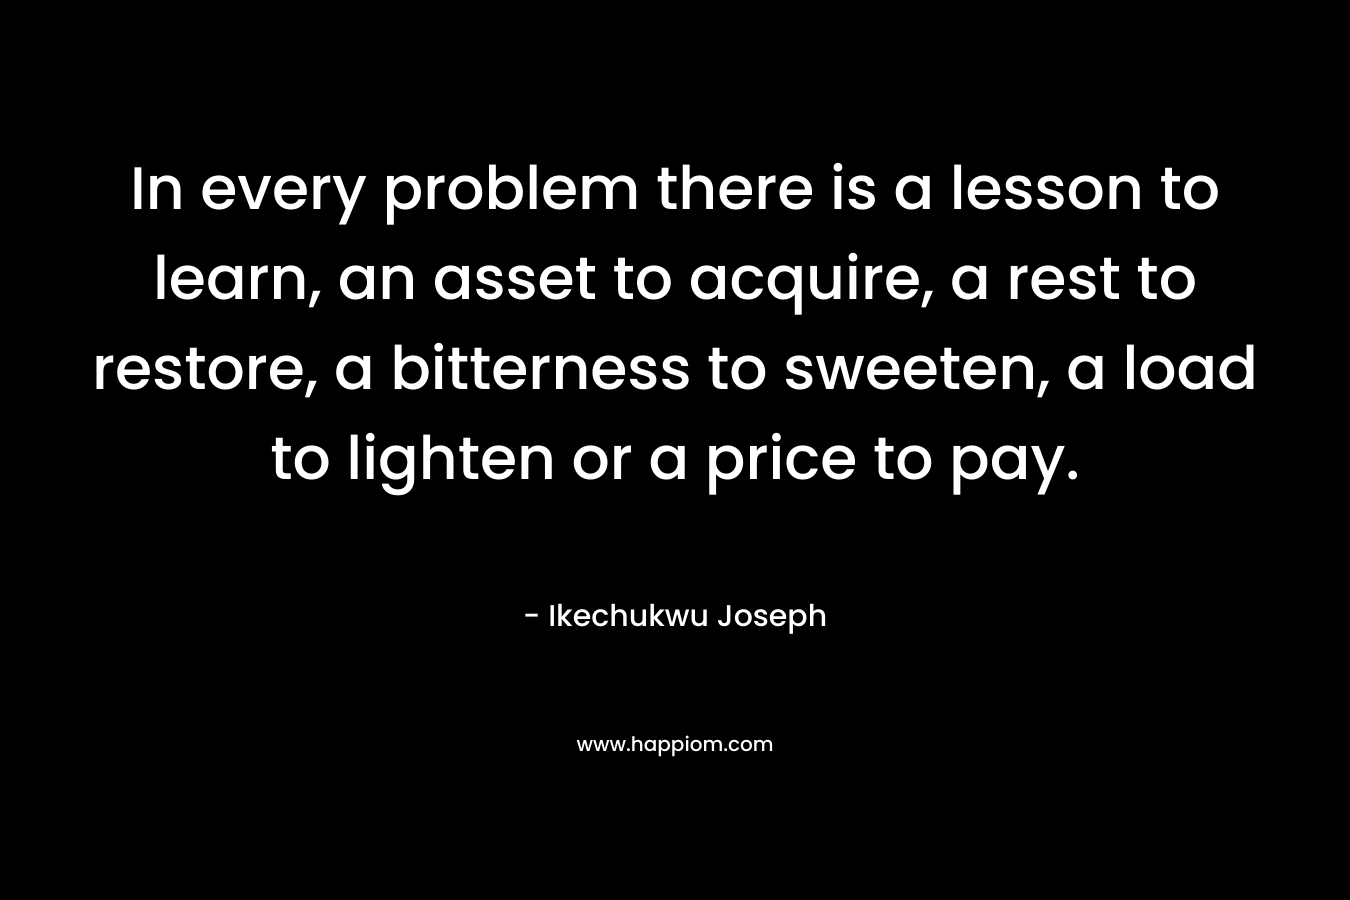 In every problem there is a lesson to learn, an asset to acquire, a rest to restore, a bitterness to sweeten, a load to lighten or a price to pay. – Ikechukwu Joseph